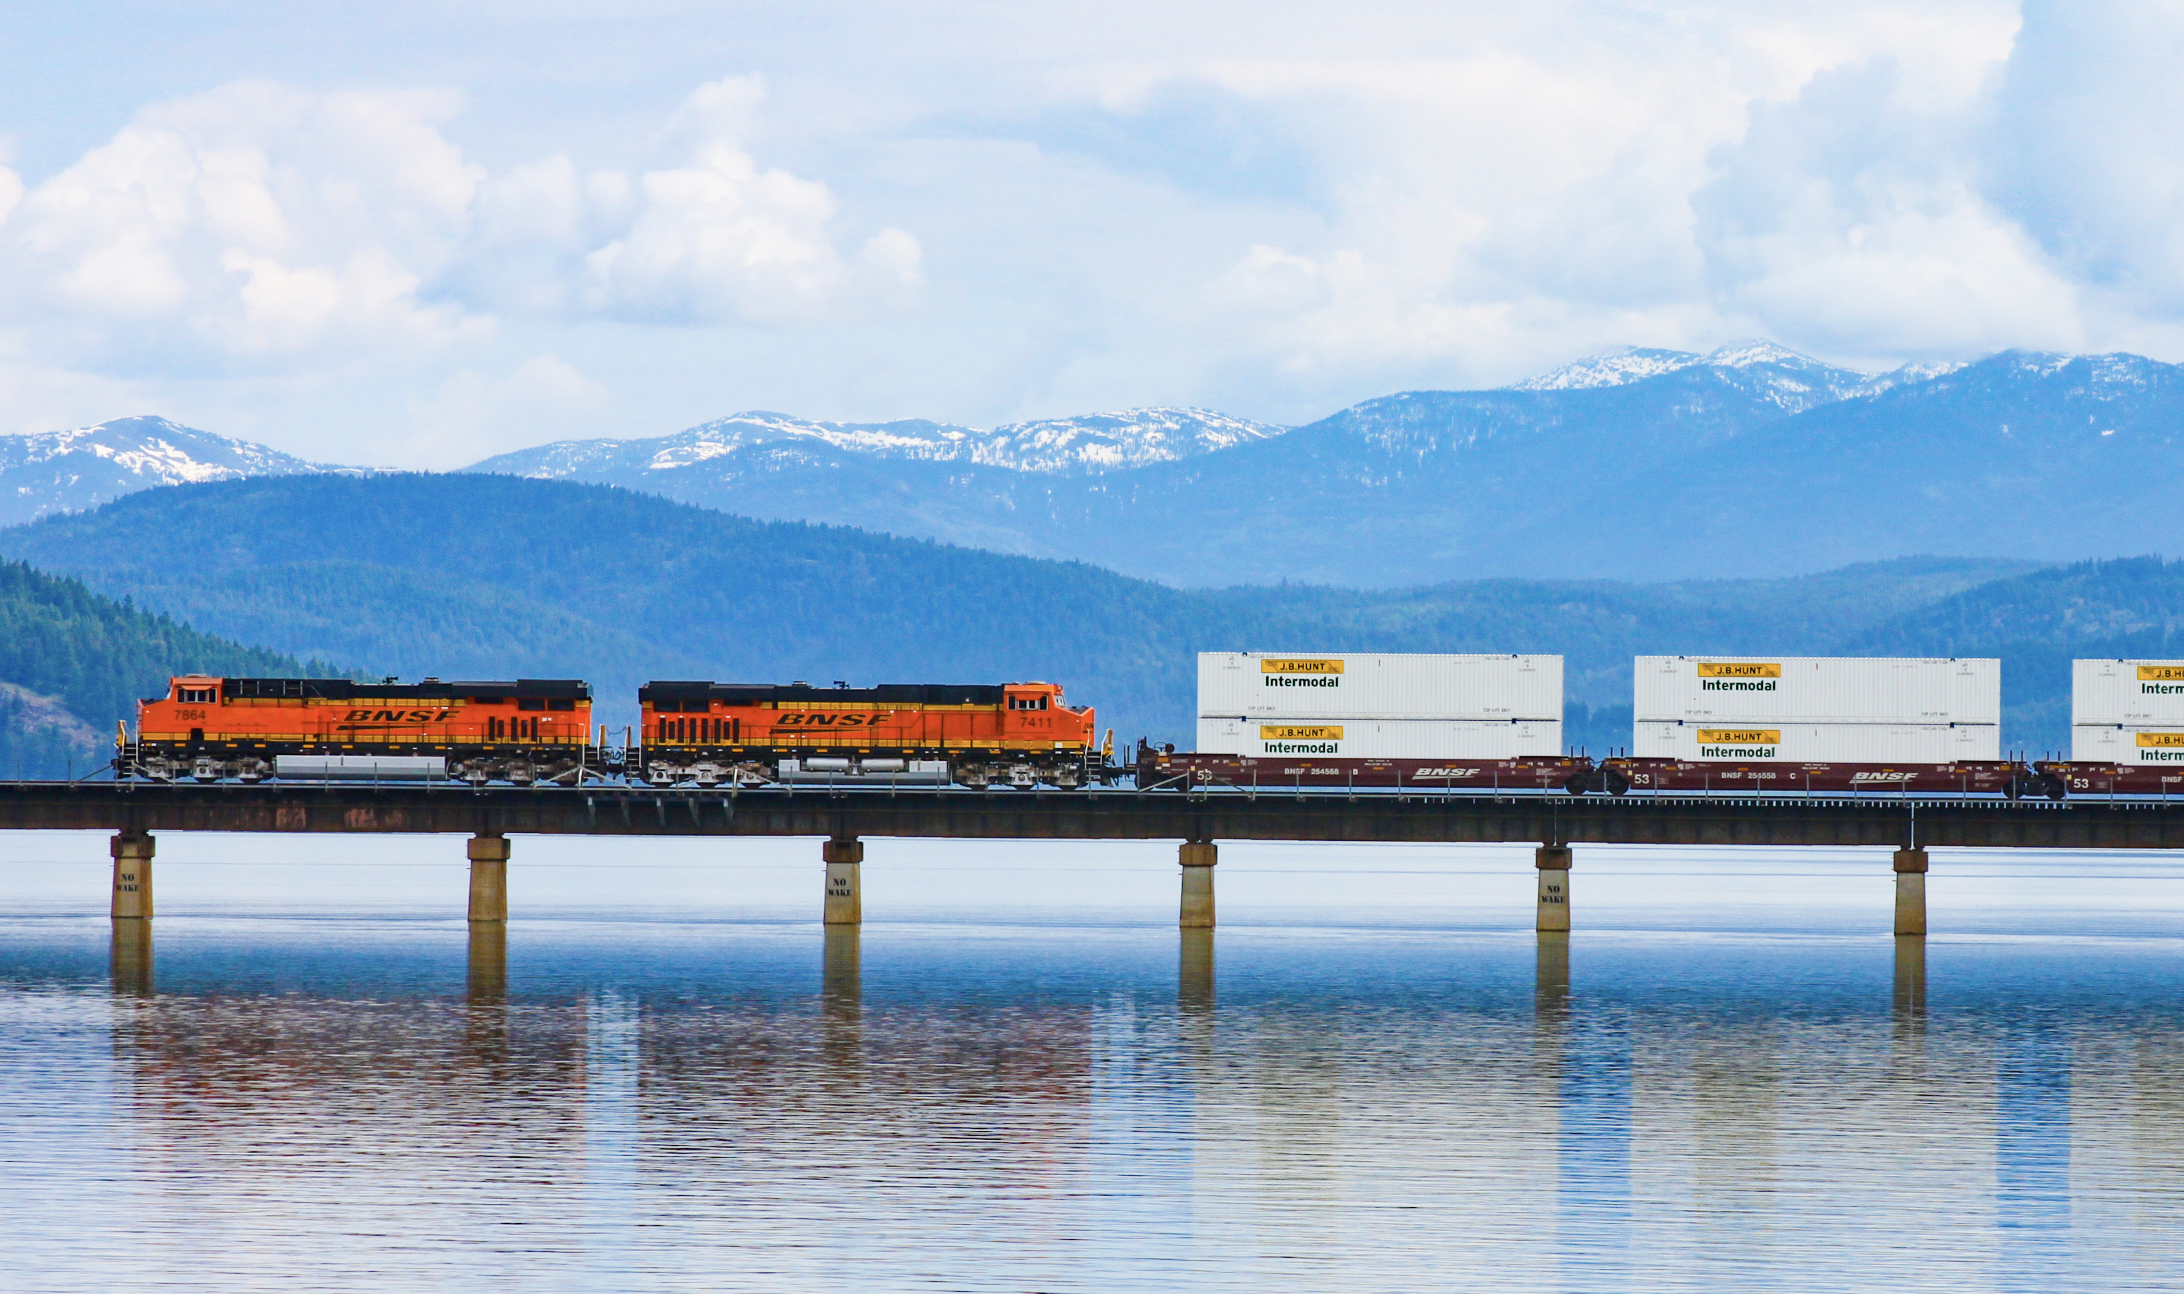 Carrier on path to grow intermodal fleet to 150,000 containers  as the largest intermodal railroad expands capacity and access